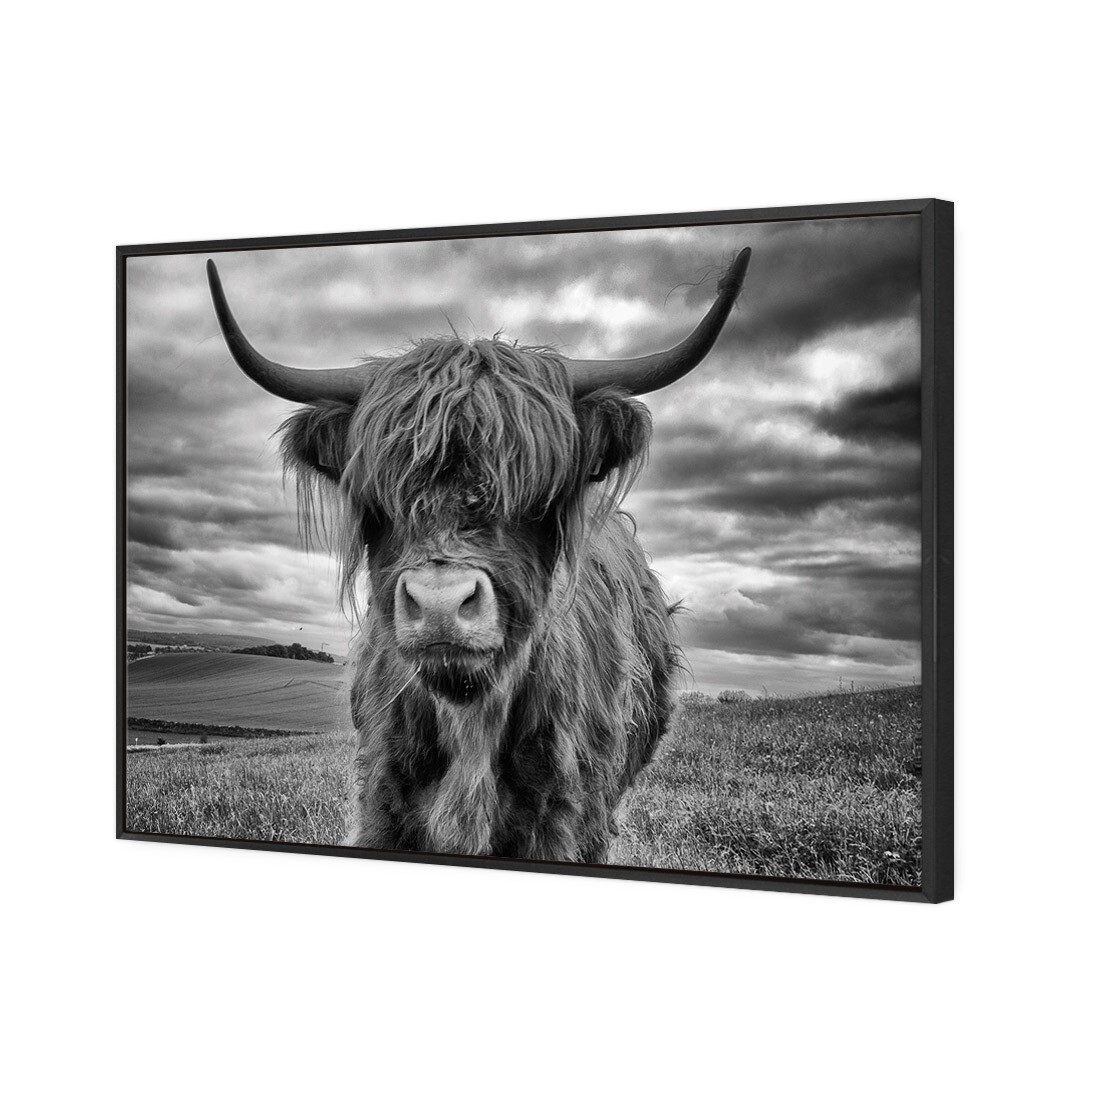 Stormy The Highland Cow 118 x 80cm Canvas with Floating Frame Black